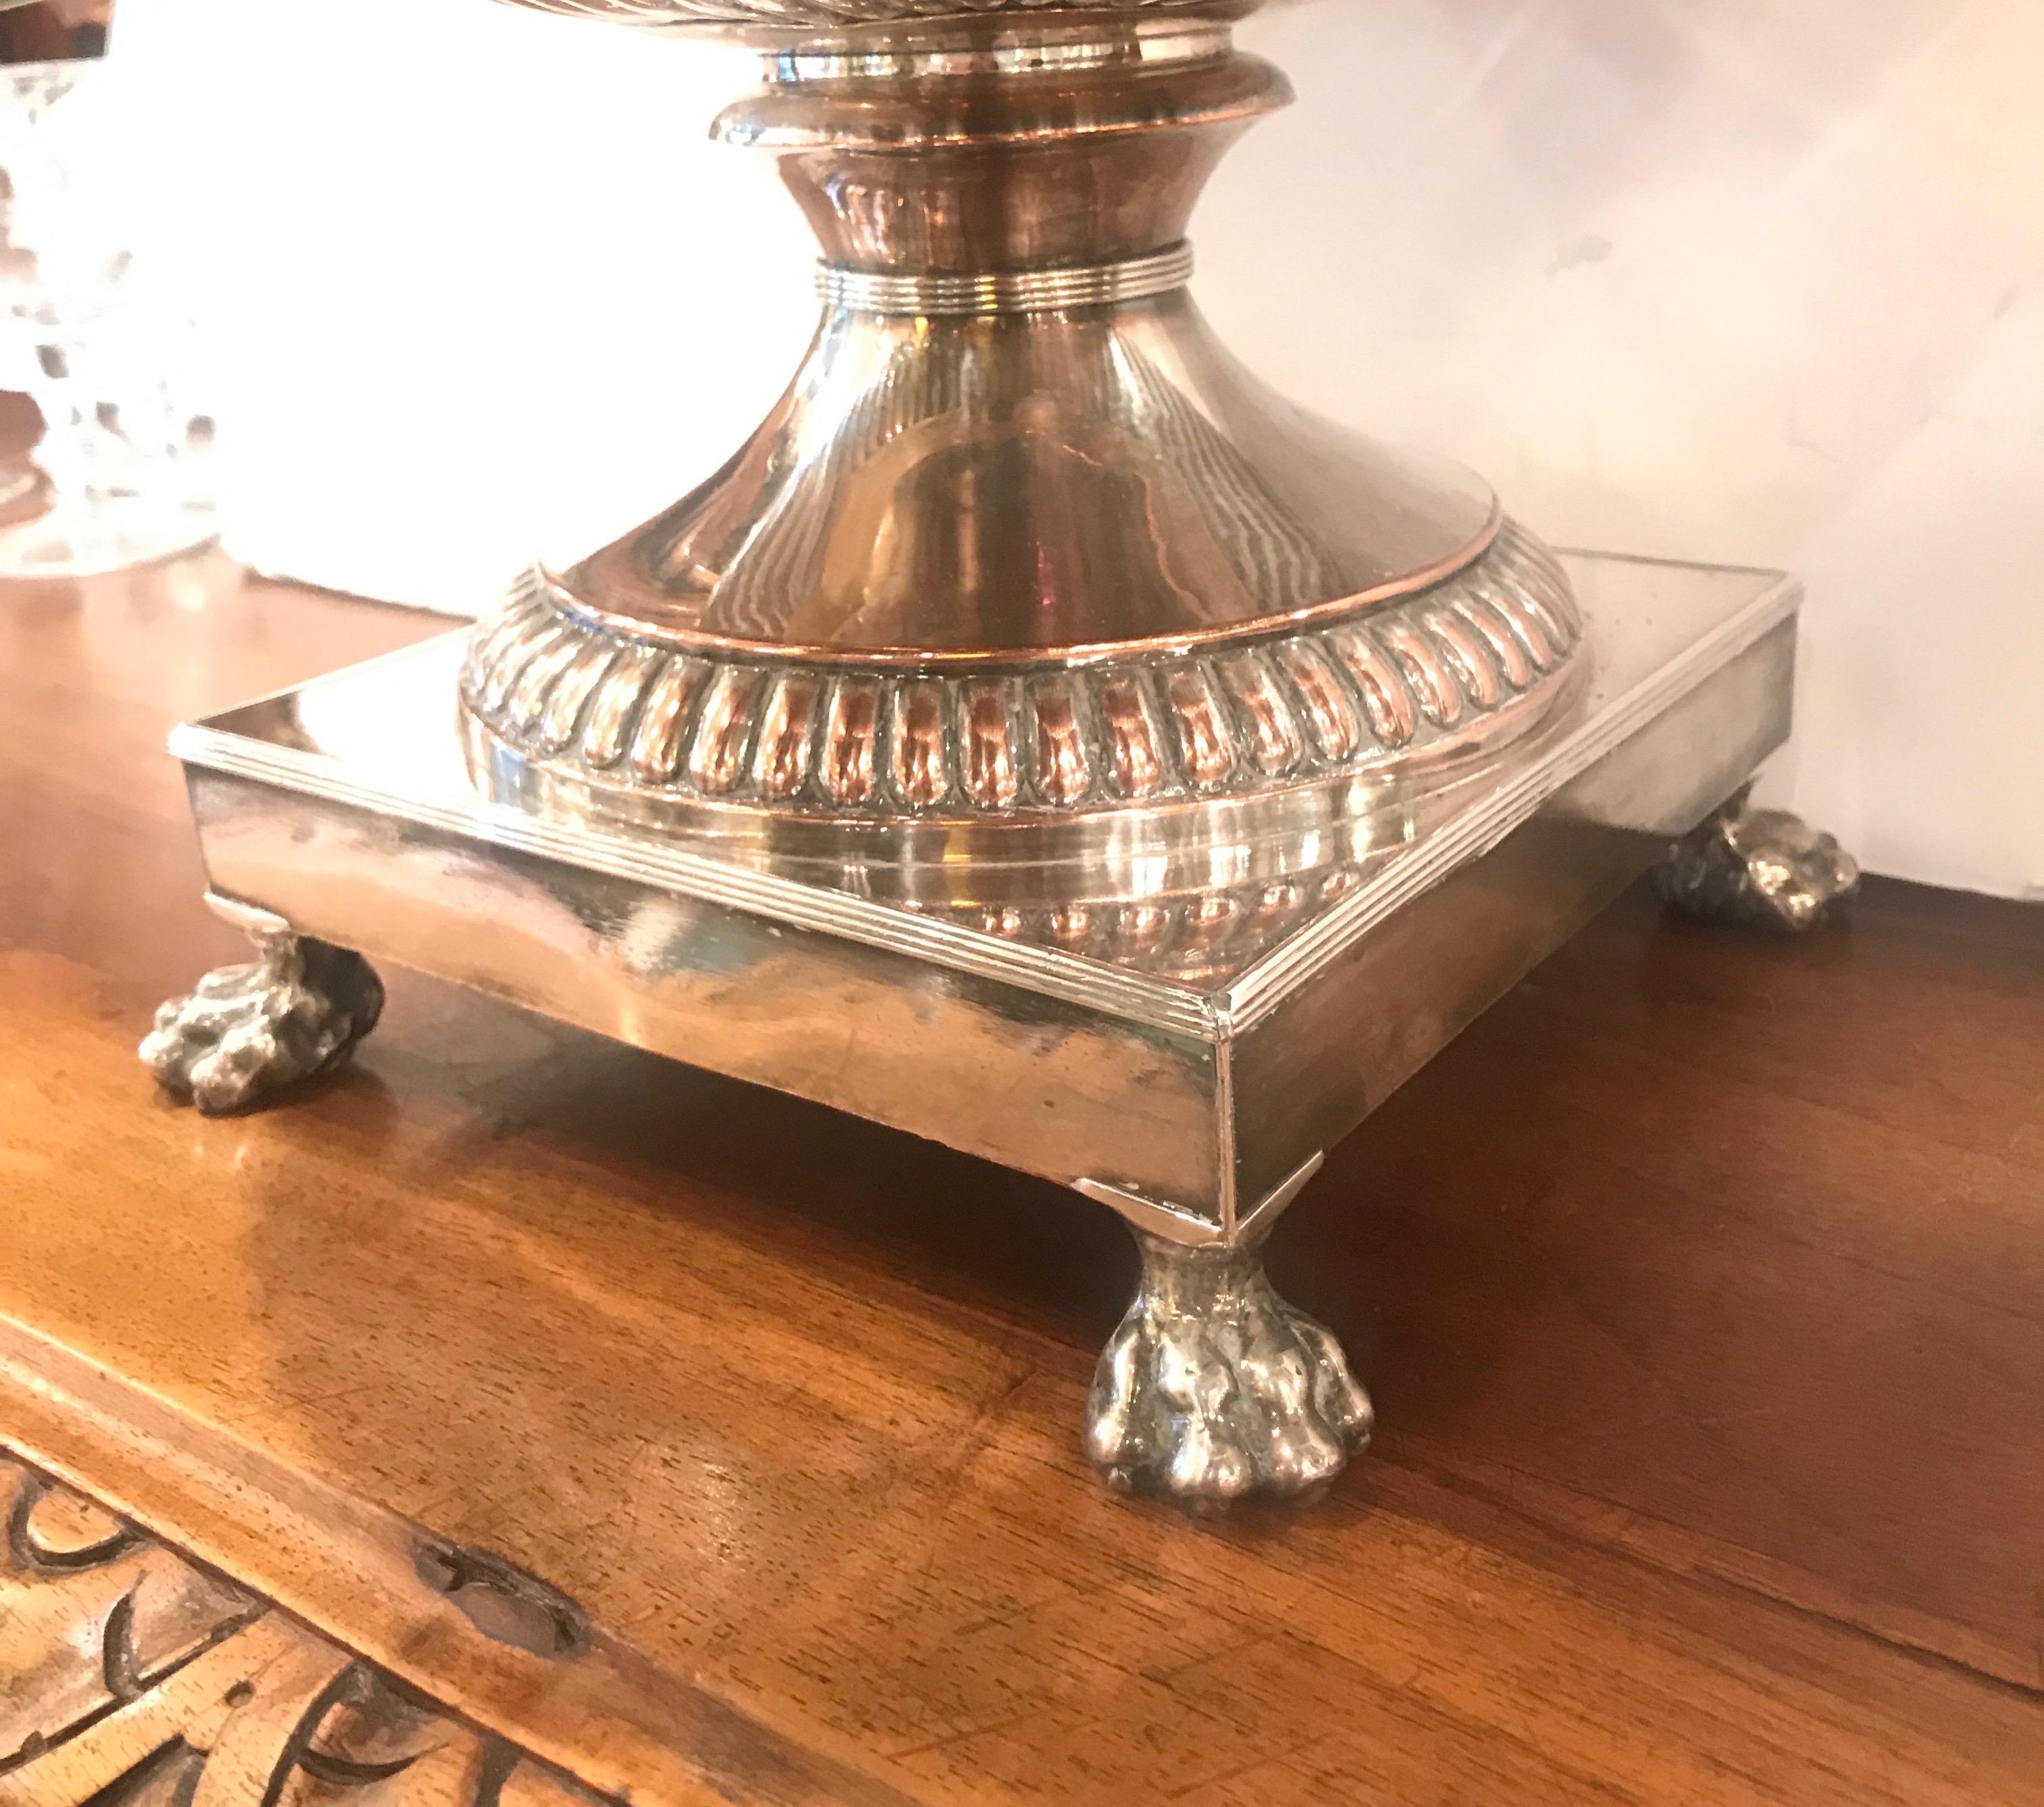 Of classical style, globular in design, the urn sits on a square pedestal base with four pawed feet, with two handles, mouthed spout. The reverted rim with heraldic device and the domed cover with leafed finial. This urn is accompanied with its